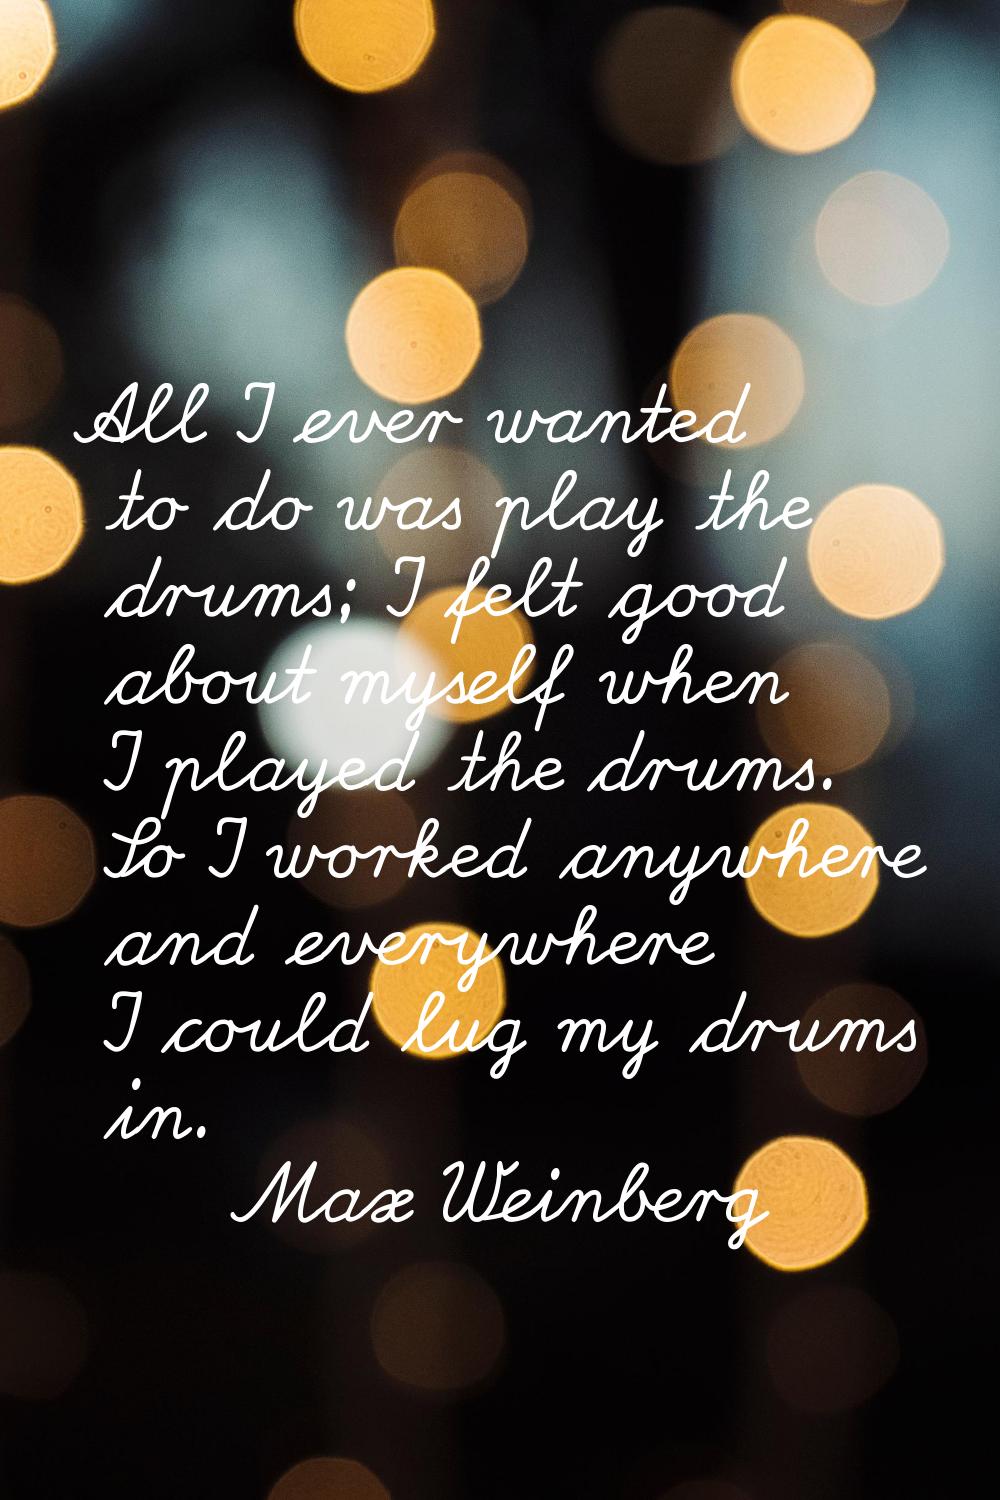 All I ever wanted to do was play the drums; I felt good about myself when I played the drums. So I 